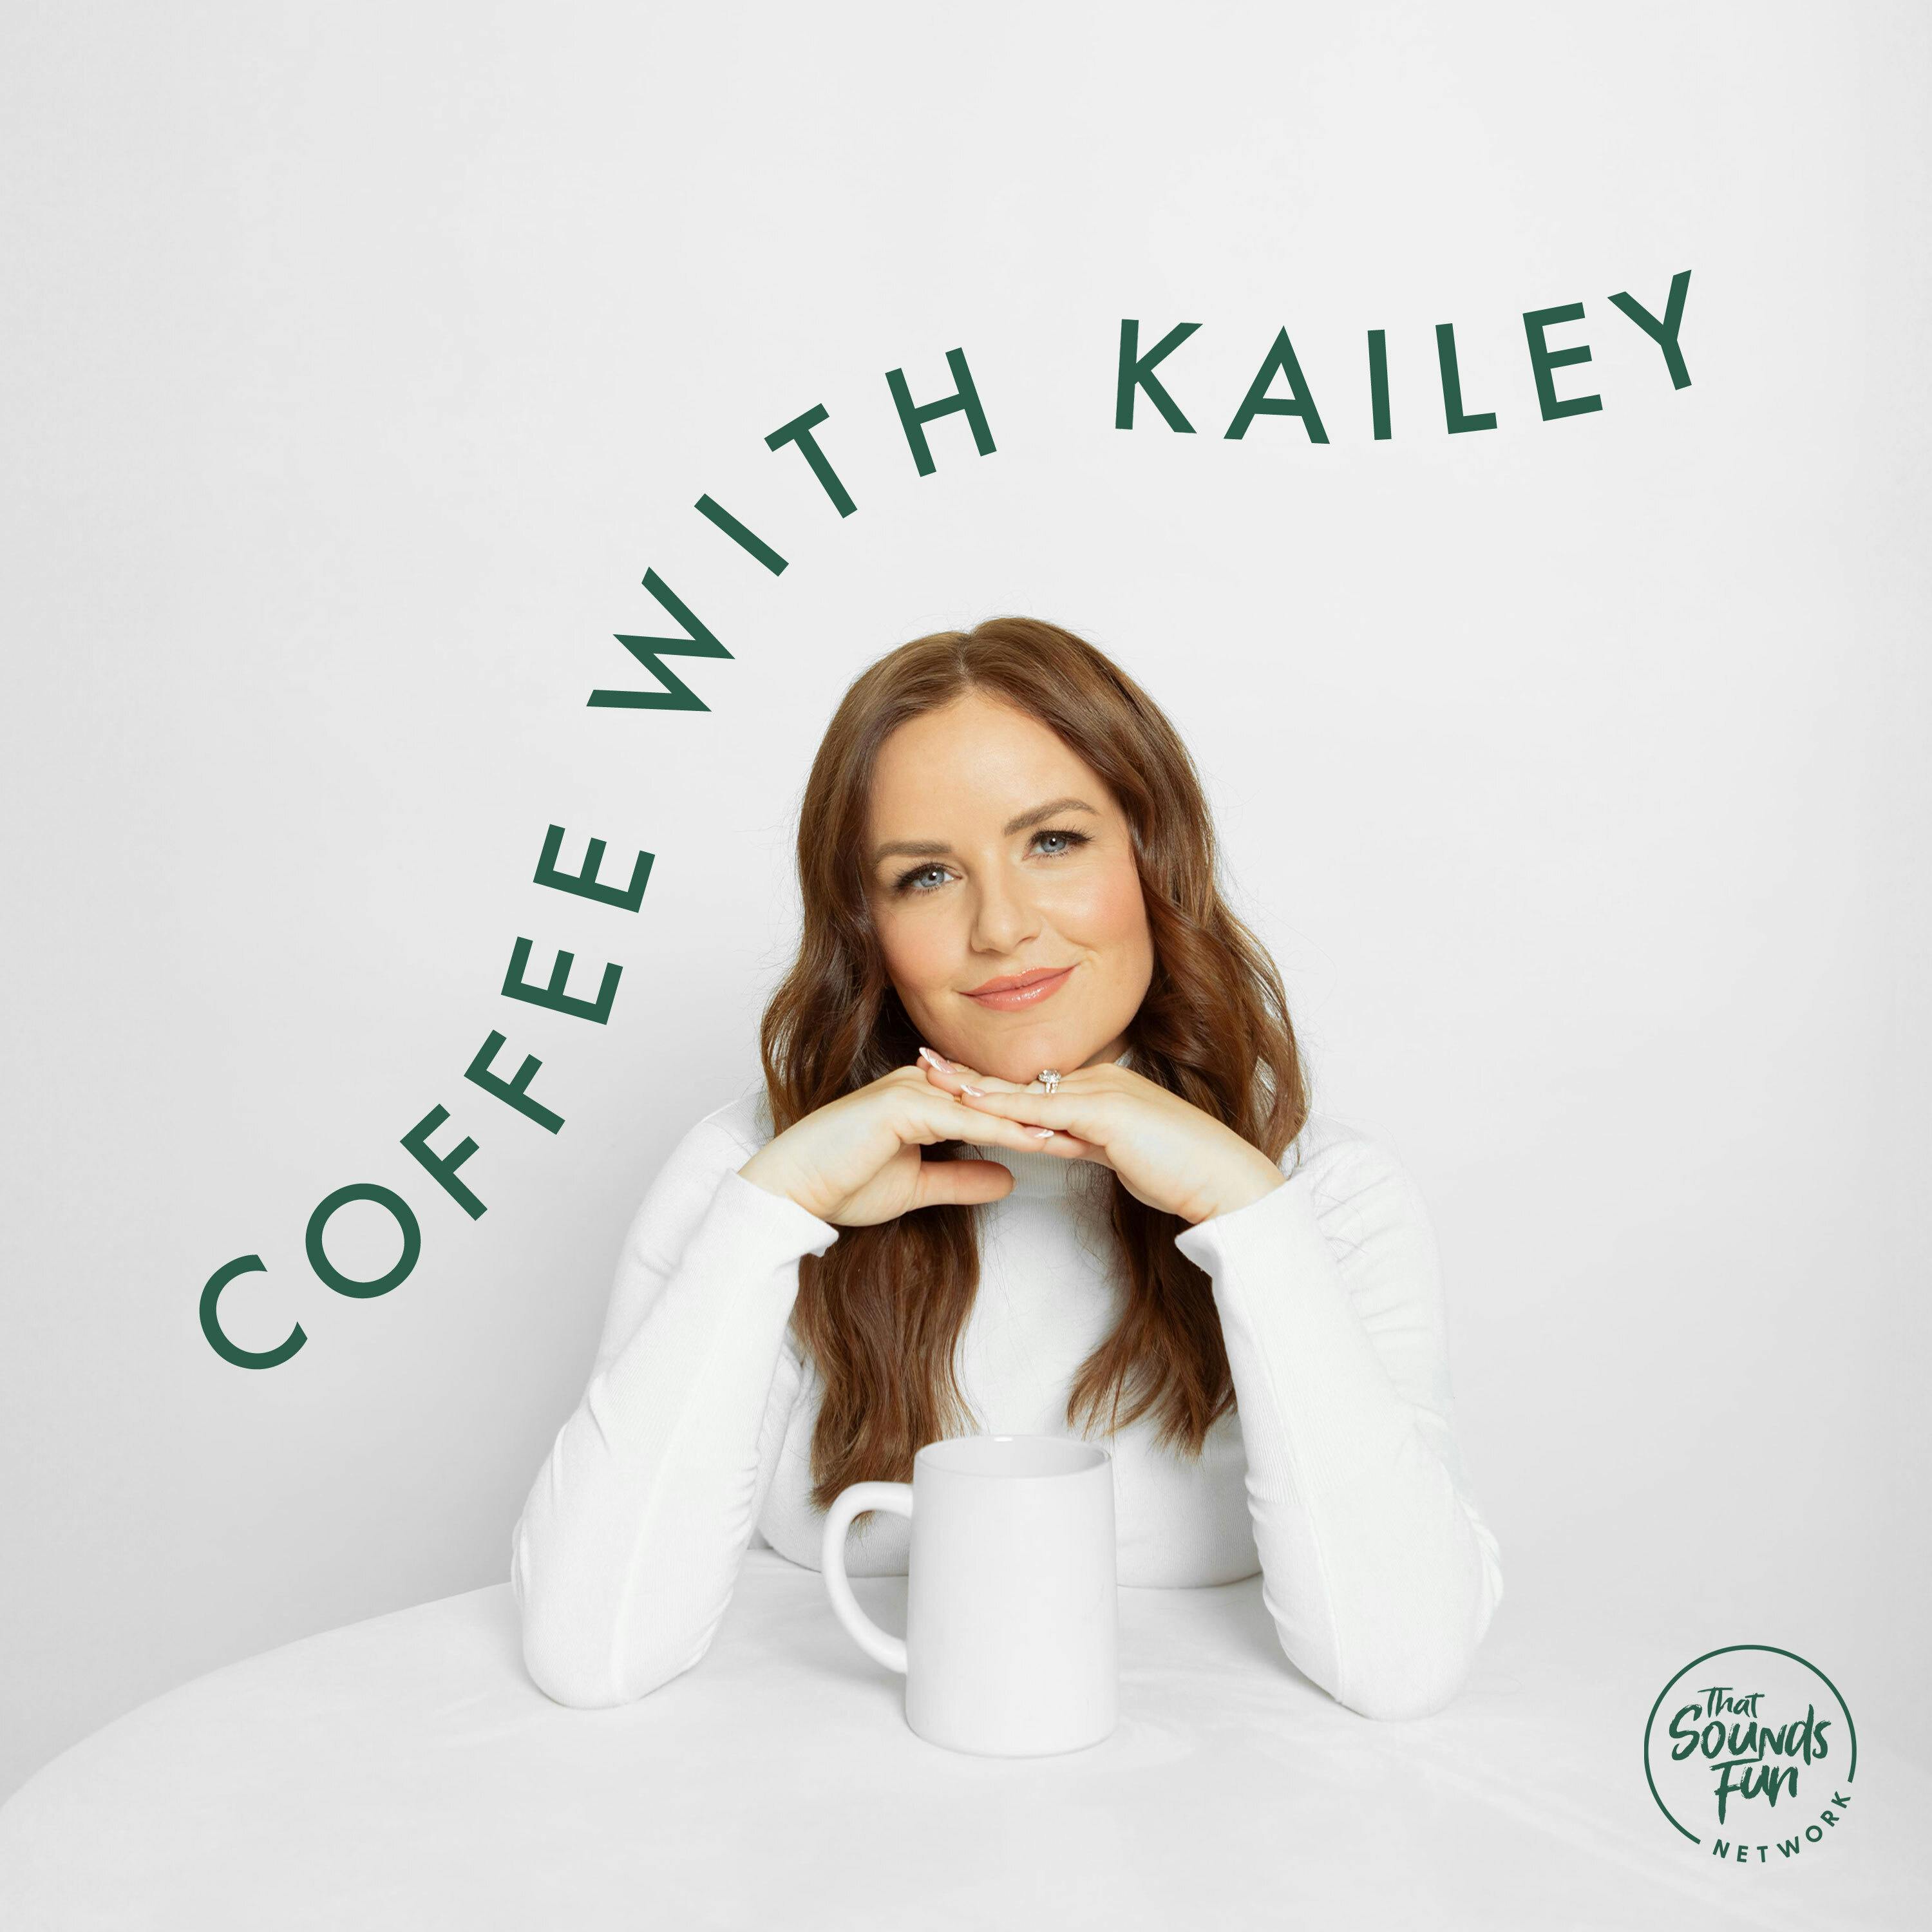 Episode 28: Kailey’s dad shares stories of passing on the baton of both faith and fun, and how he’s helped heal migraines